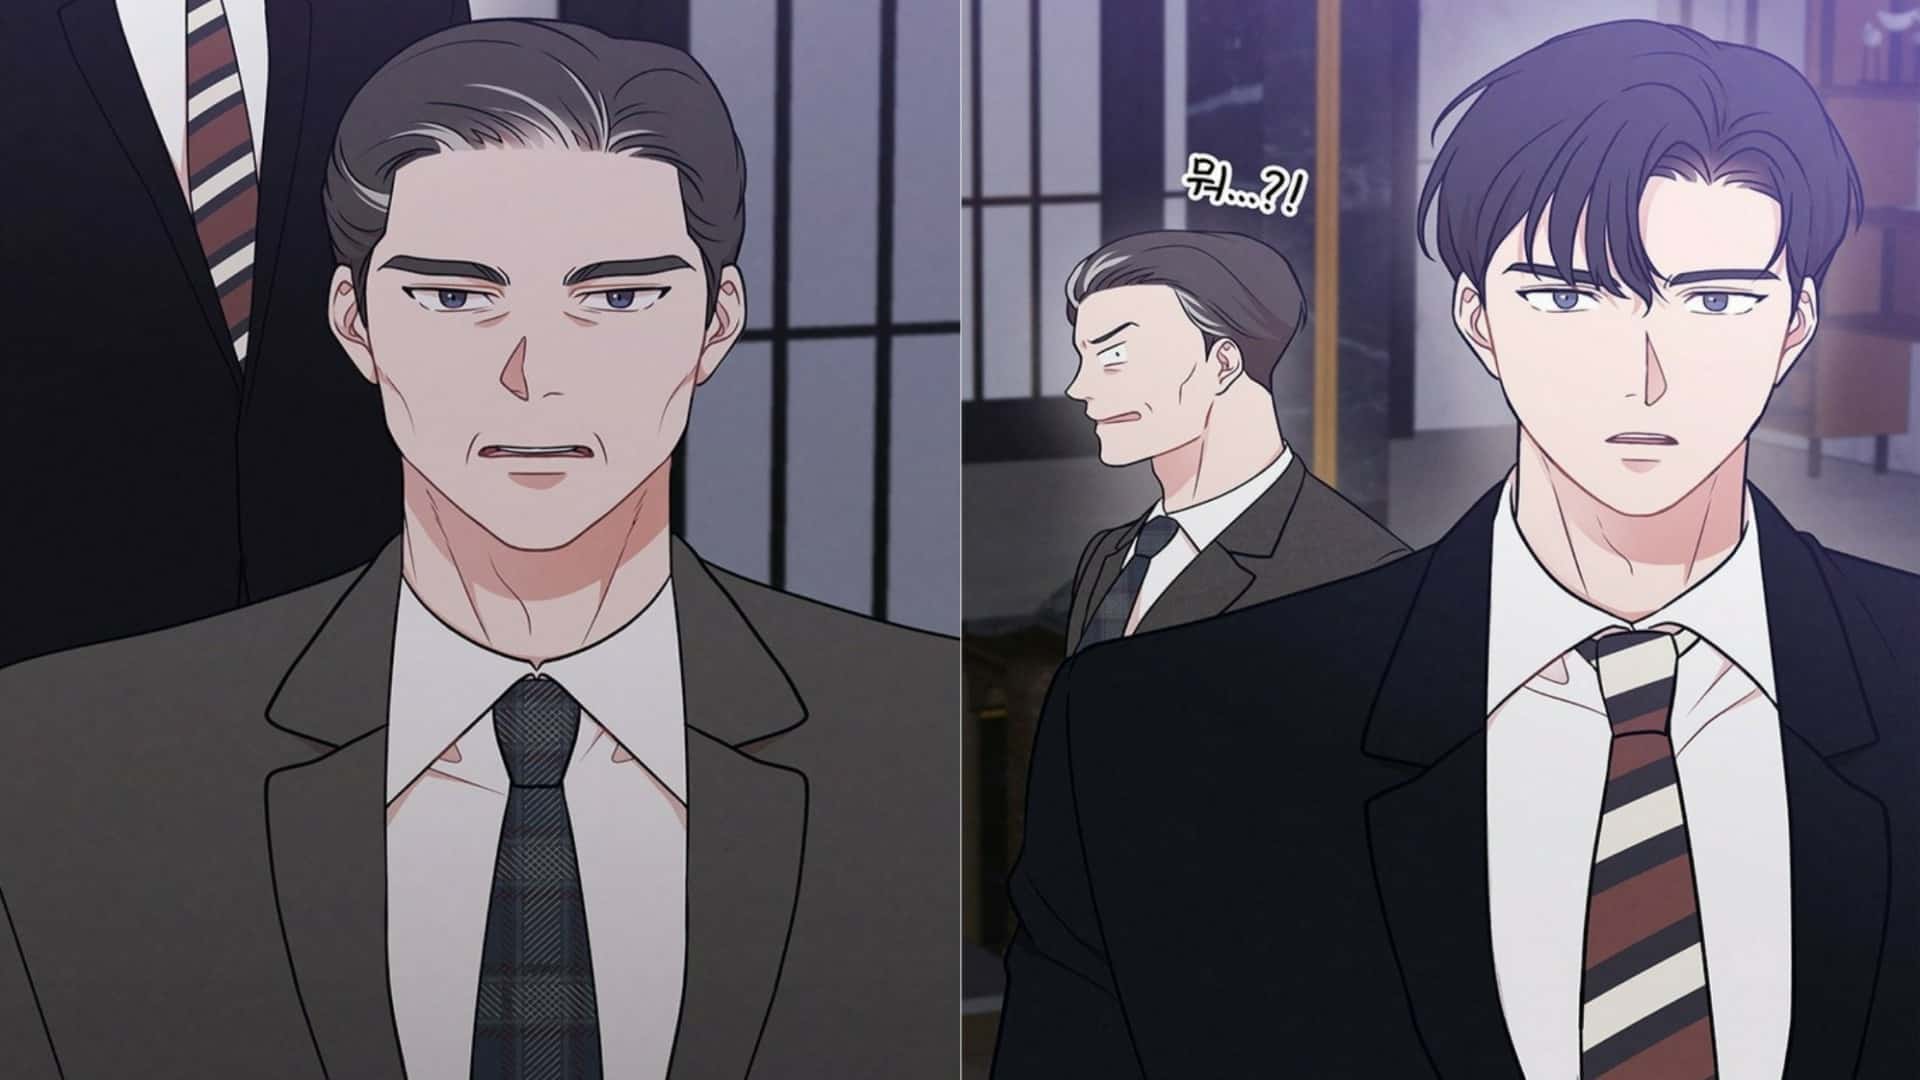 The Chairman Of Taesung Group And Mu-Jin's Father (Left) And President Of Taesung Group Tae Mu-Jin (Right) - My Boss’s Perfect Wedding Chapter 3 Spoilers